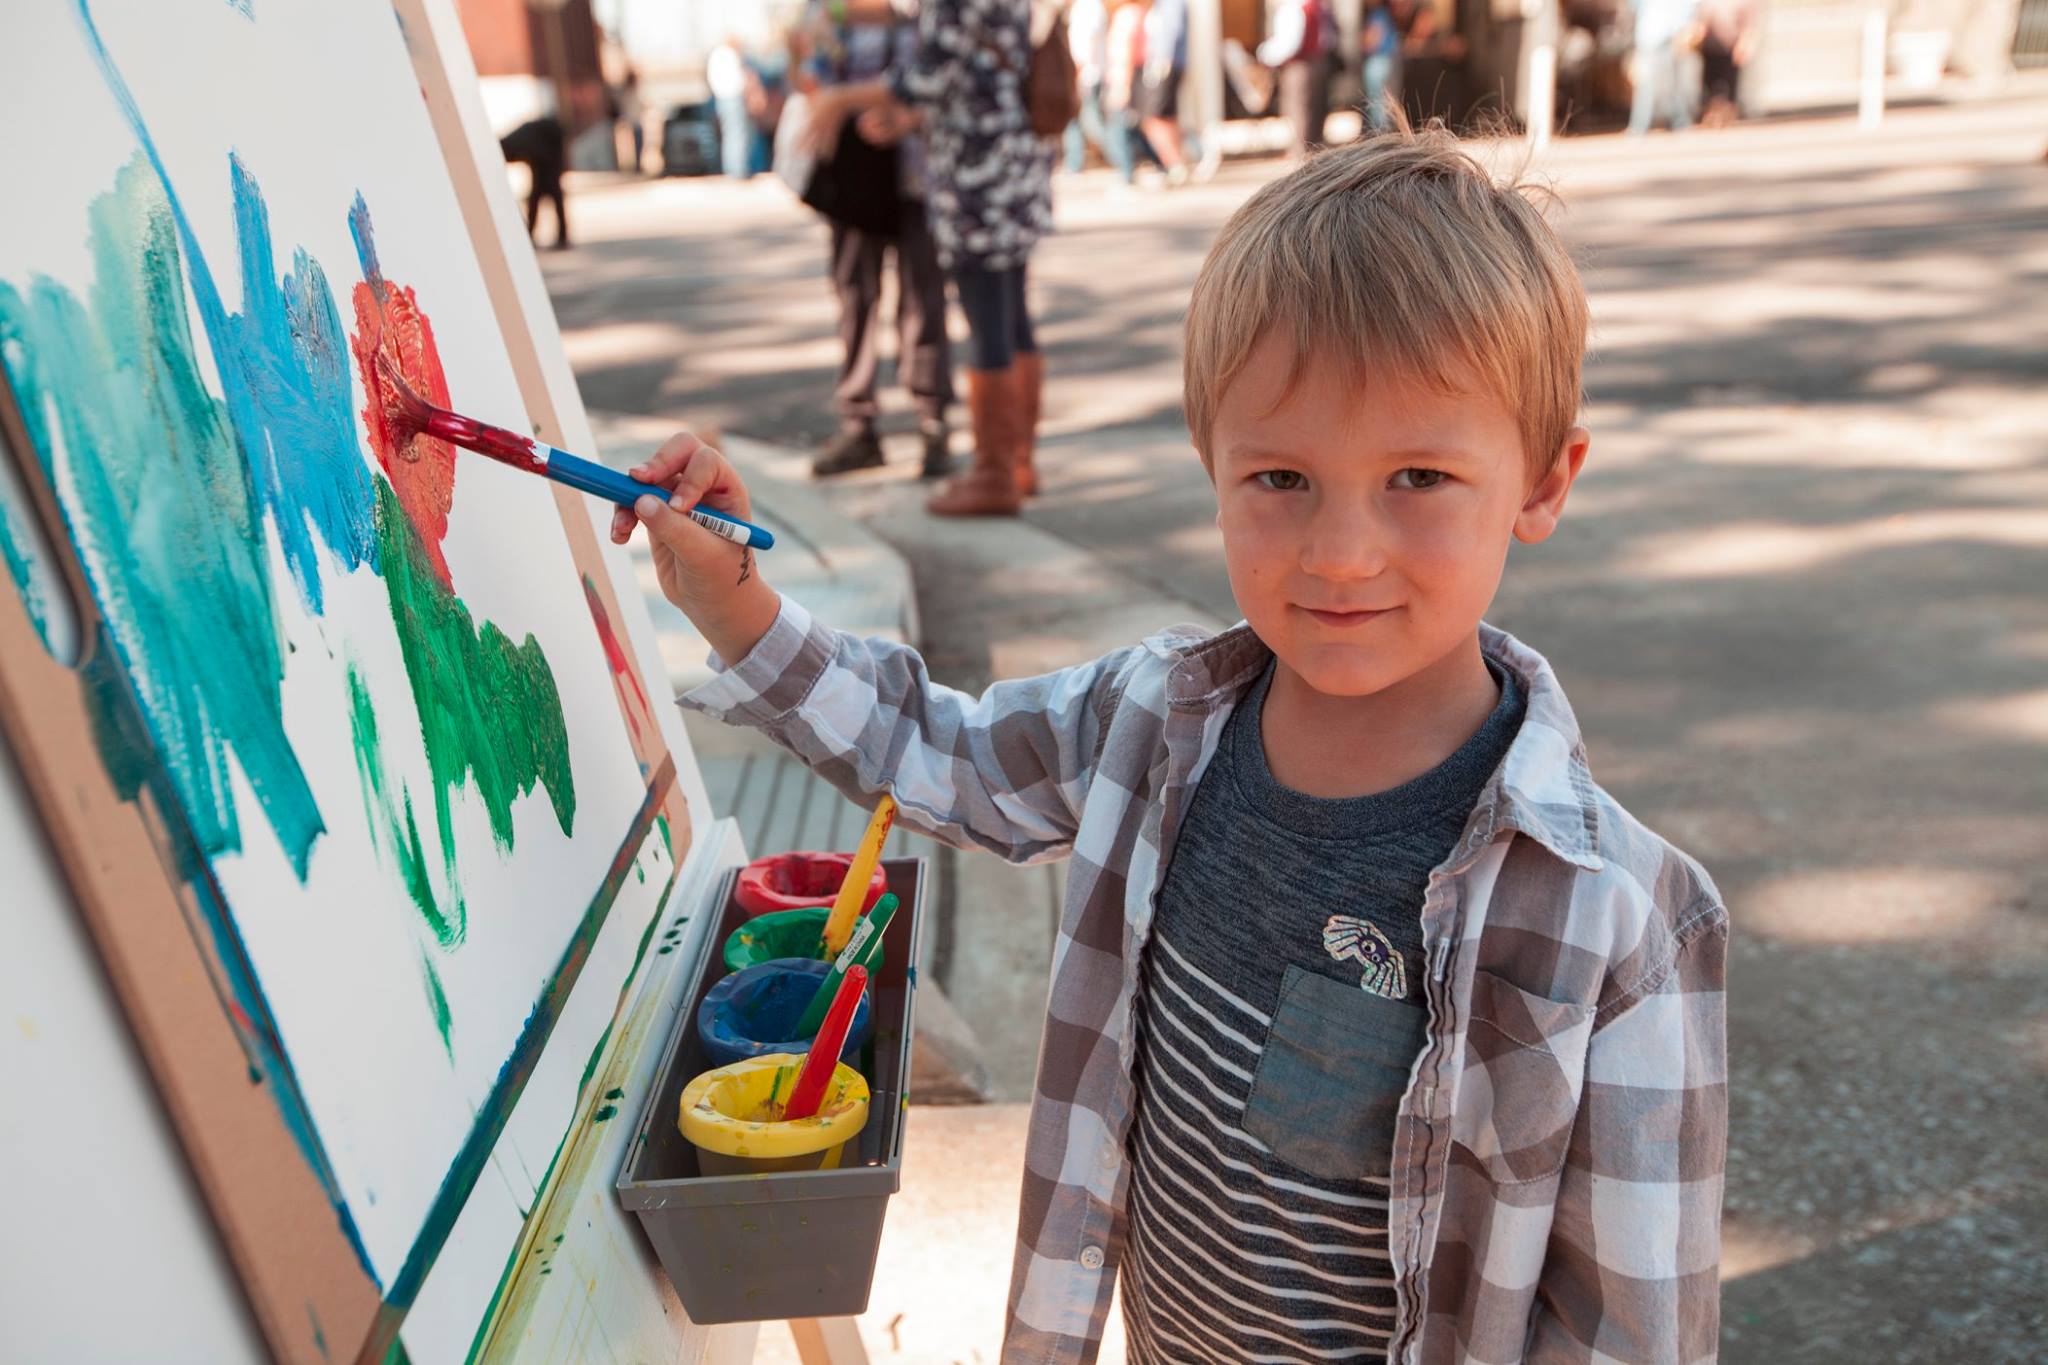 A young artist at the Art Center-led kids section at RiverArtsFest. (Courtesy RiverArtsFest)